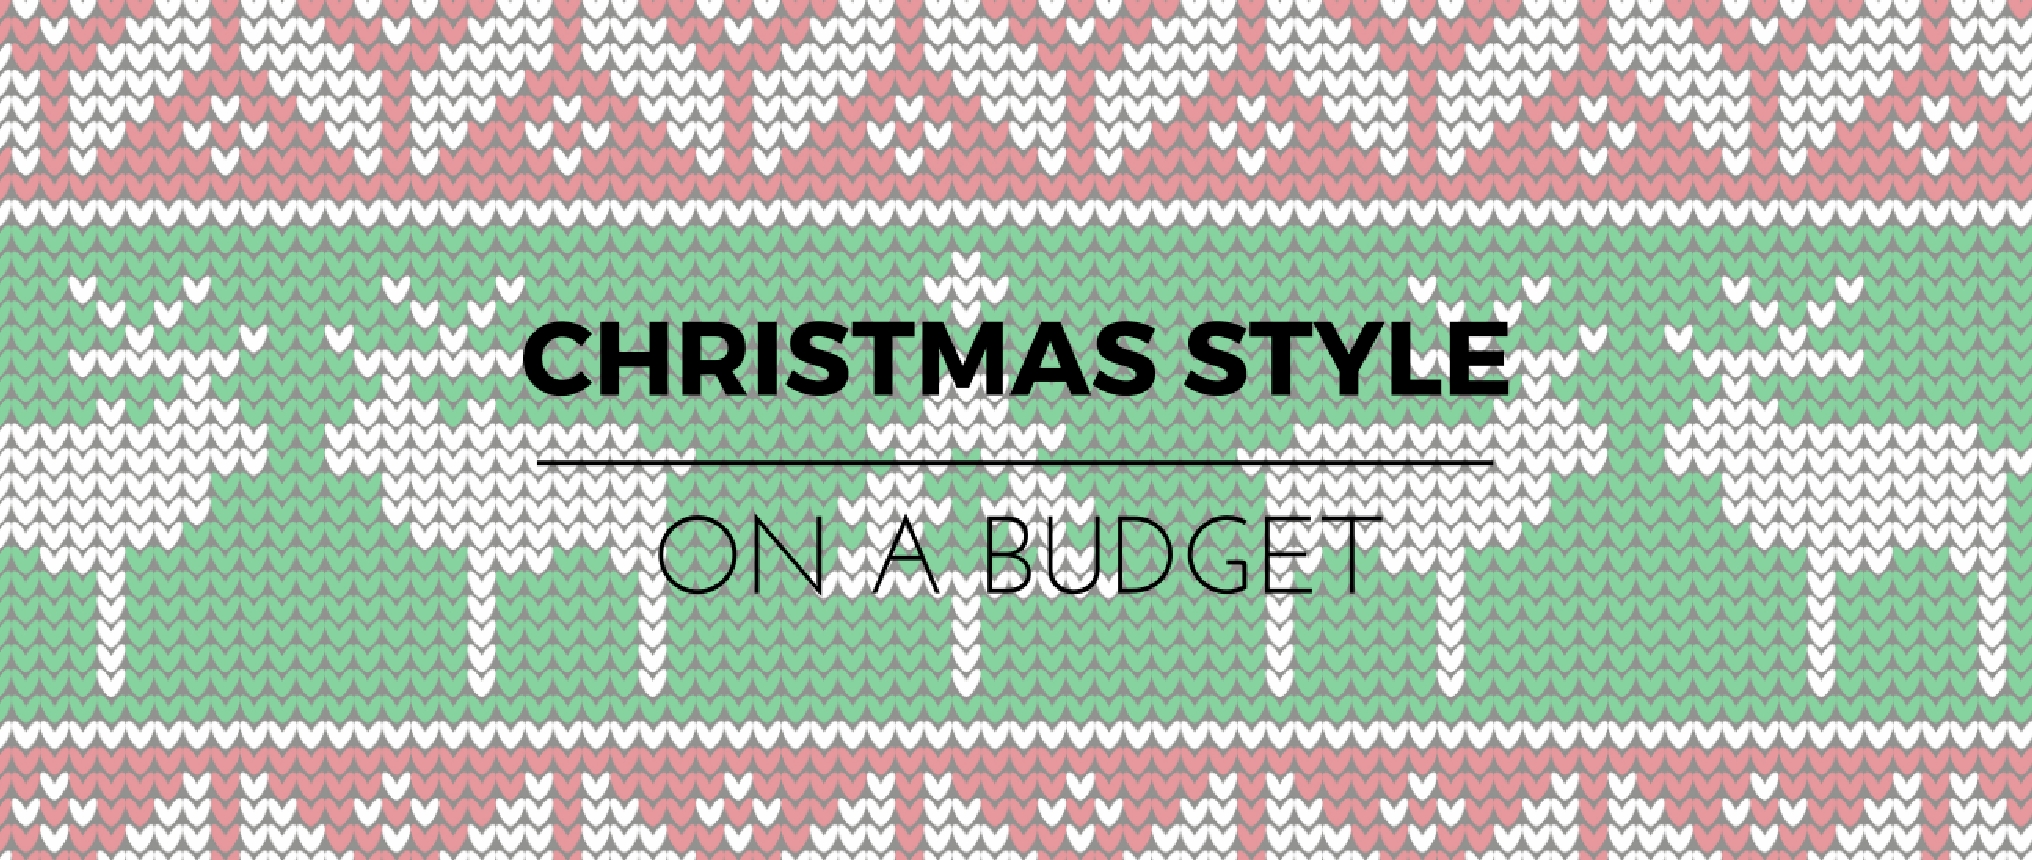 Christmas Style on a Budget